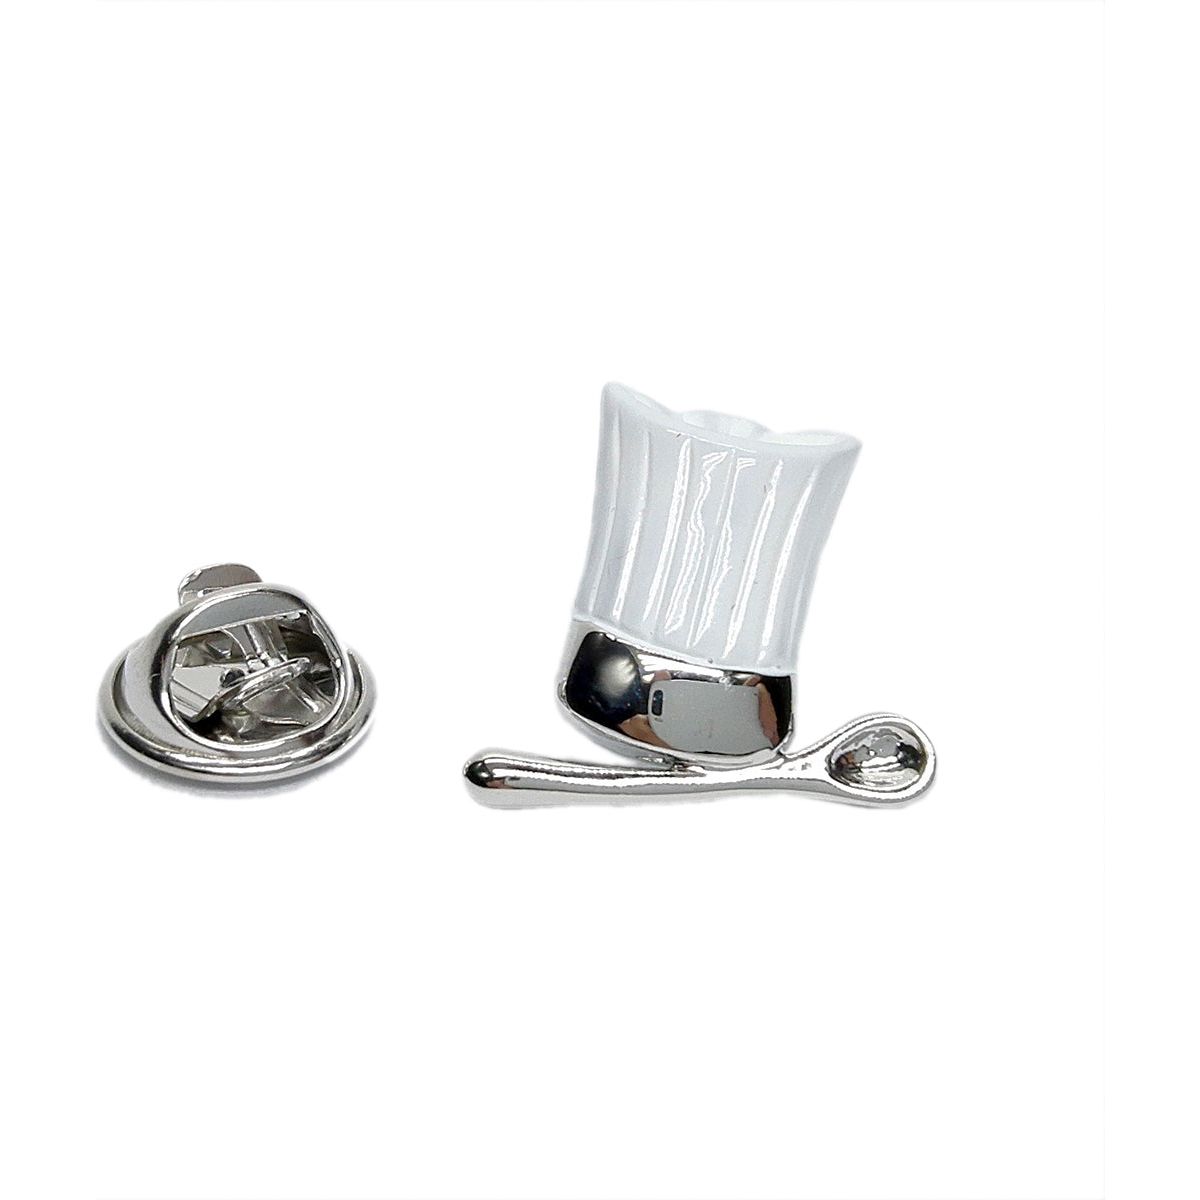 White Chefs Hat Lapel Pin Badge - Ashton and Finch